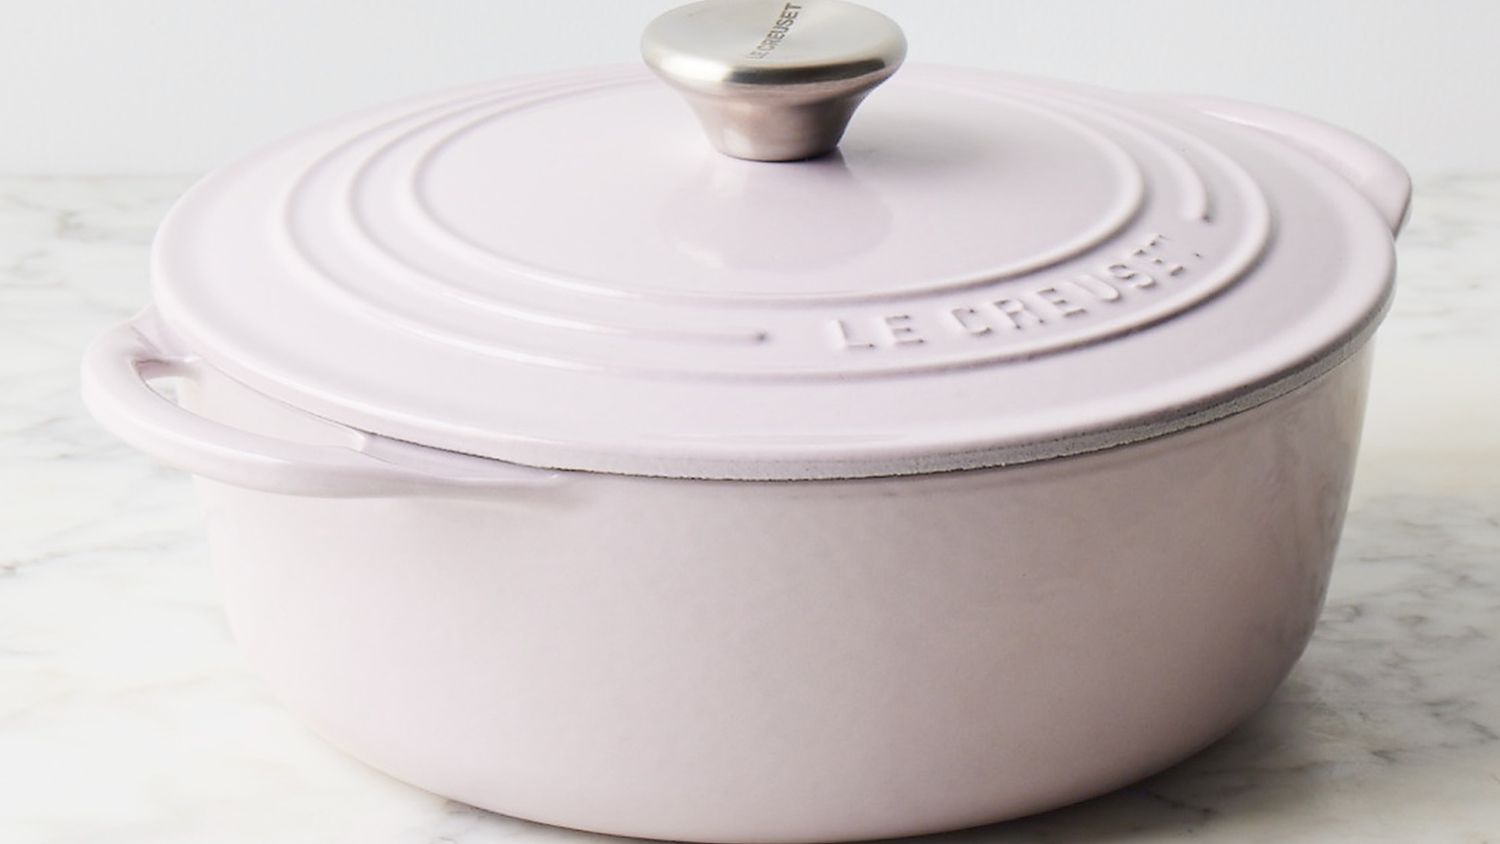 Le Creuset Cast Iron Shallow Round Dutch Oven - 2.75-qt Sea Salt – Cutlery  and More